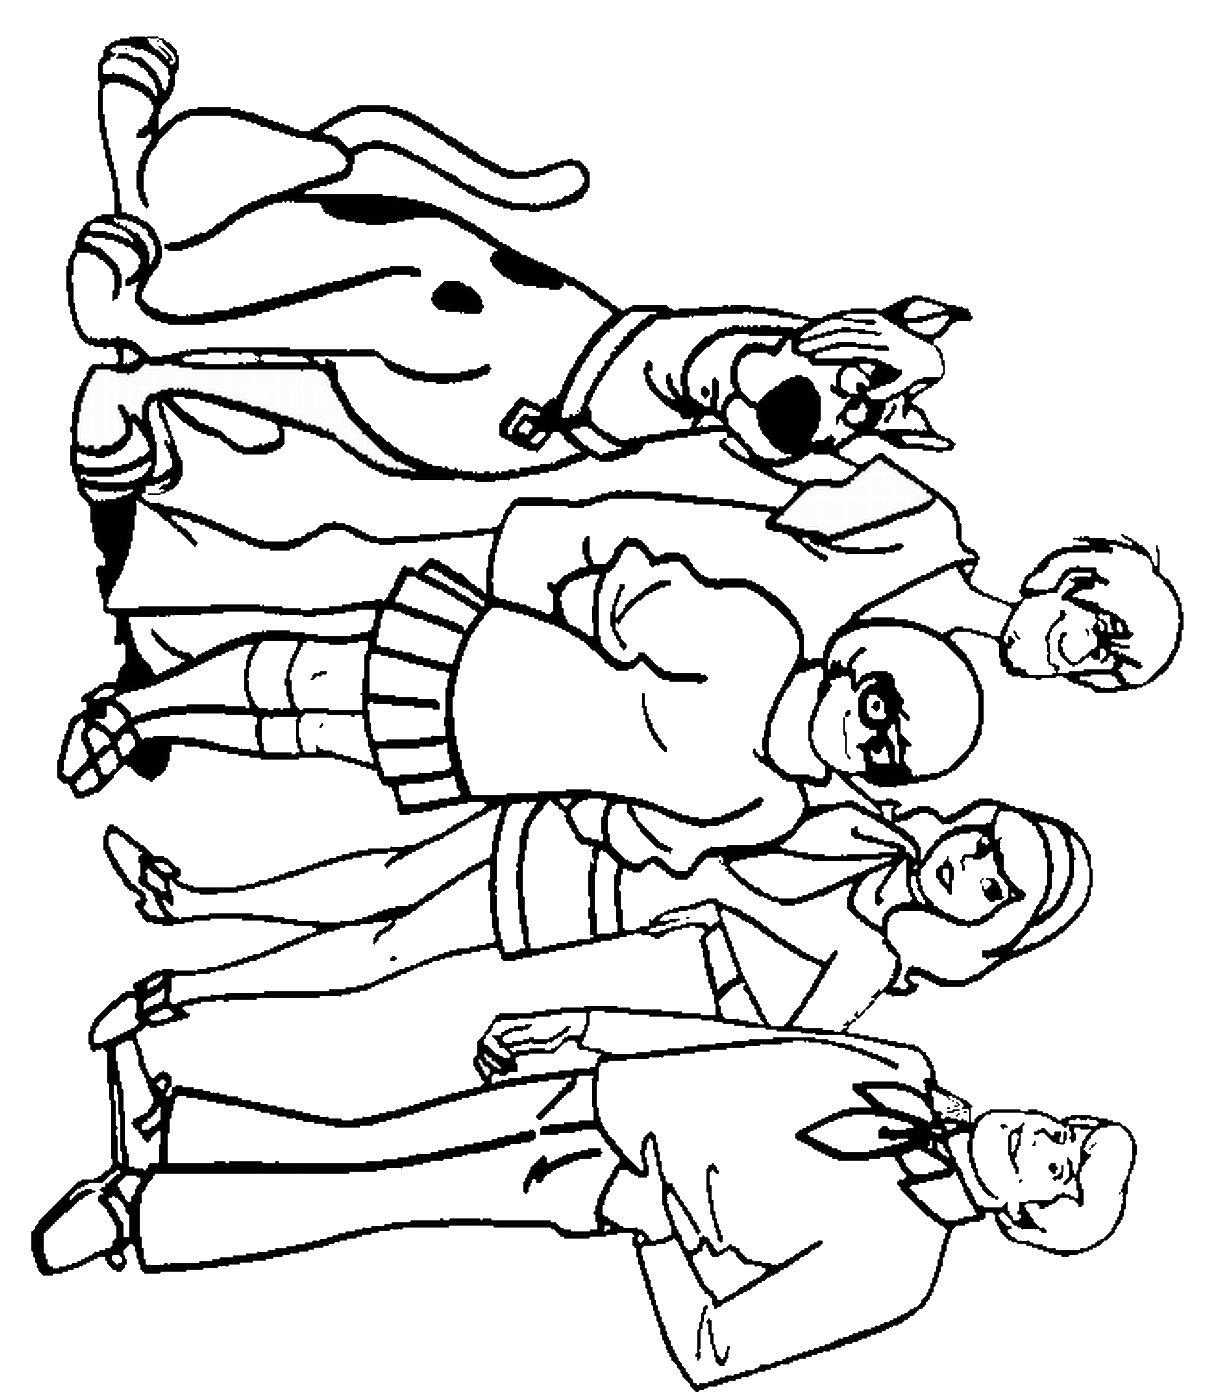 scooby doo printable pictures to color scooby doo pictures to print coloring pages pictures to scooby color printable doo 